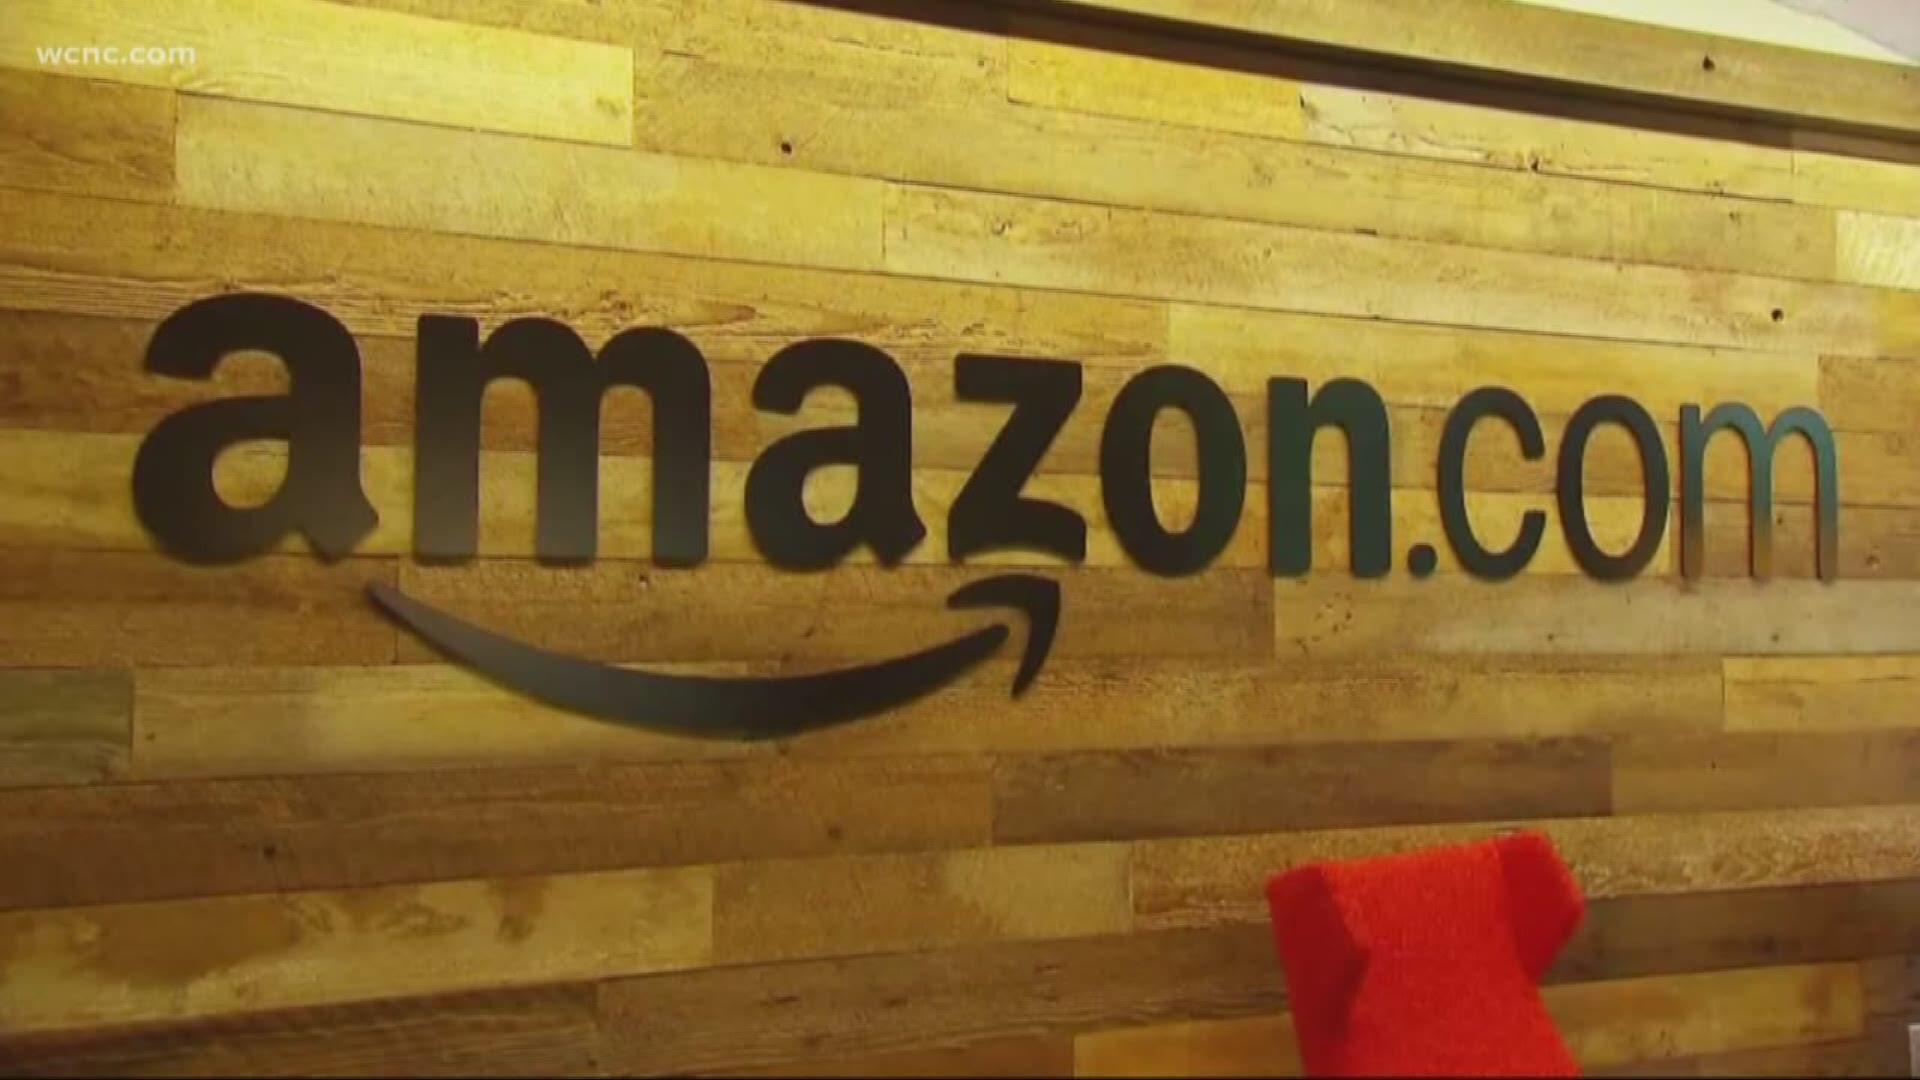 Amazon to recruit in west CLT for new warehouse jobs